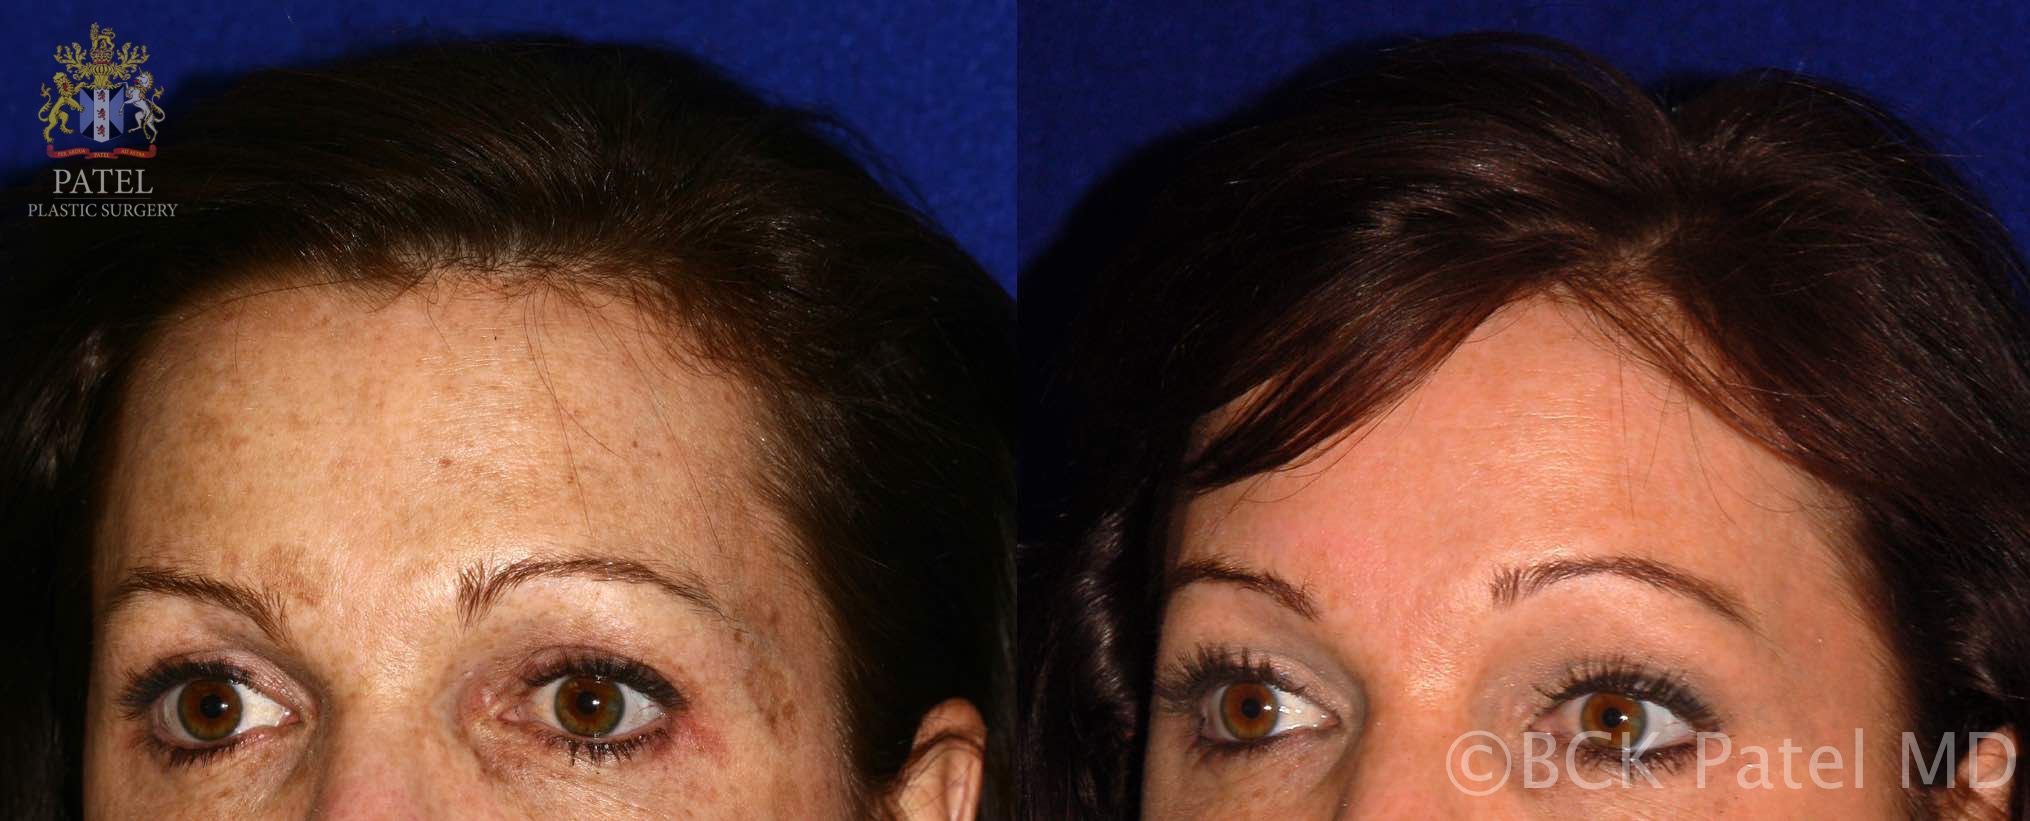 englishsurgeon.com. Photos show before-and-after of advanced fotofacial laser treatments. BCK Patel MD, FRCS